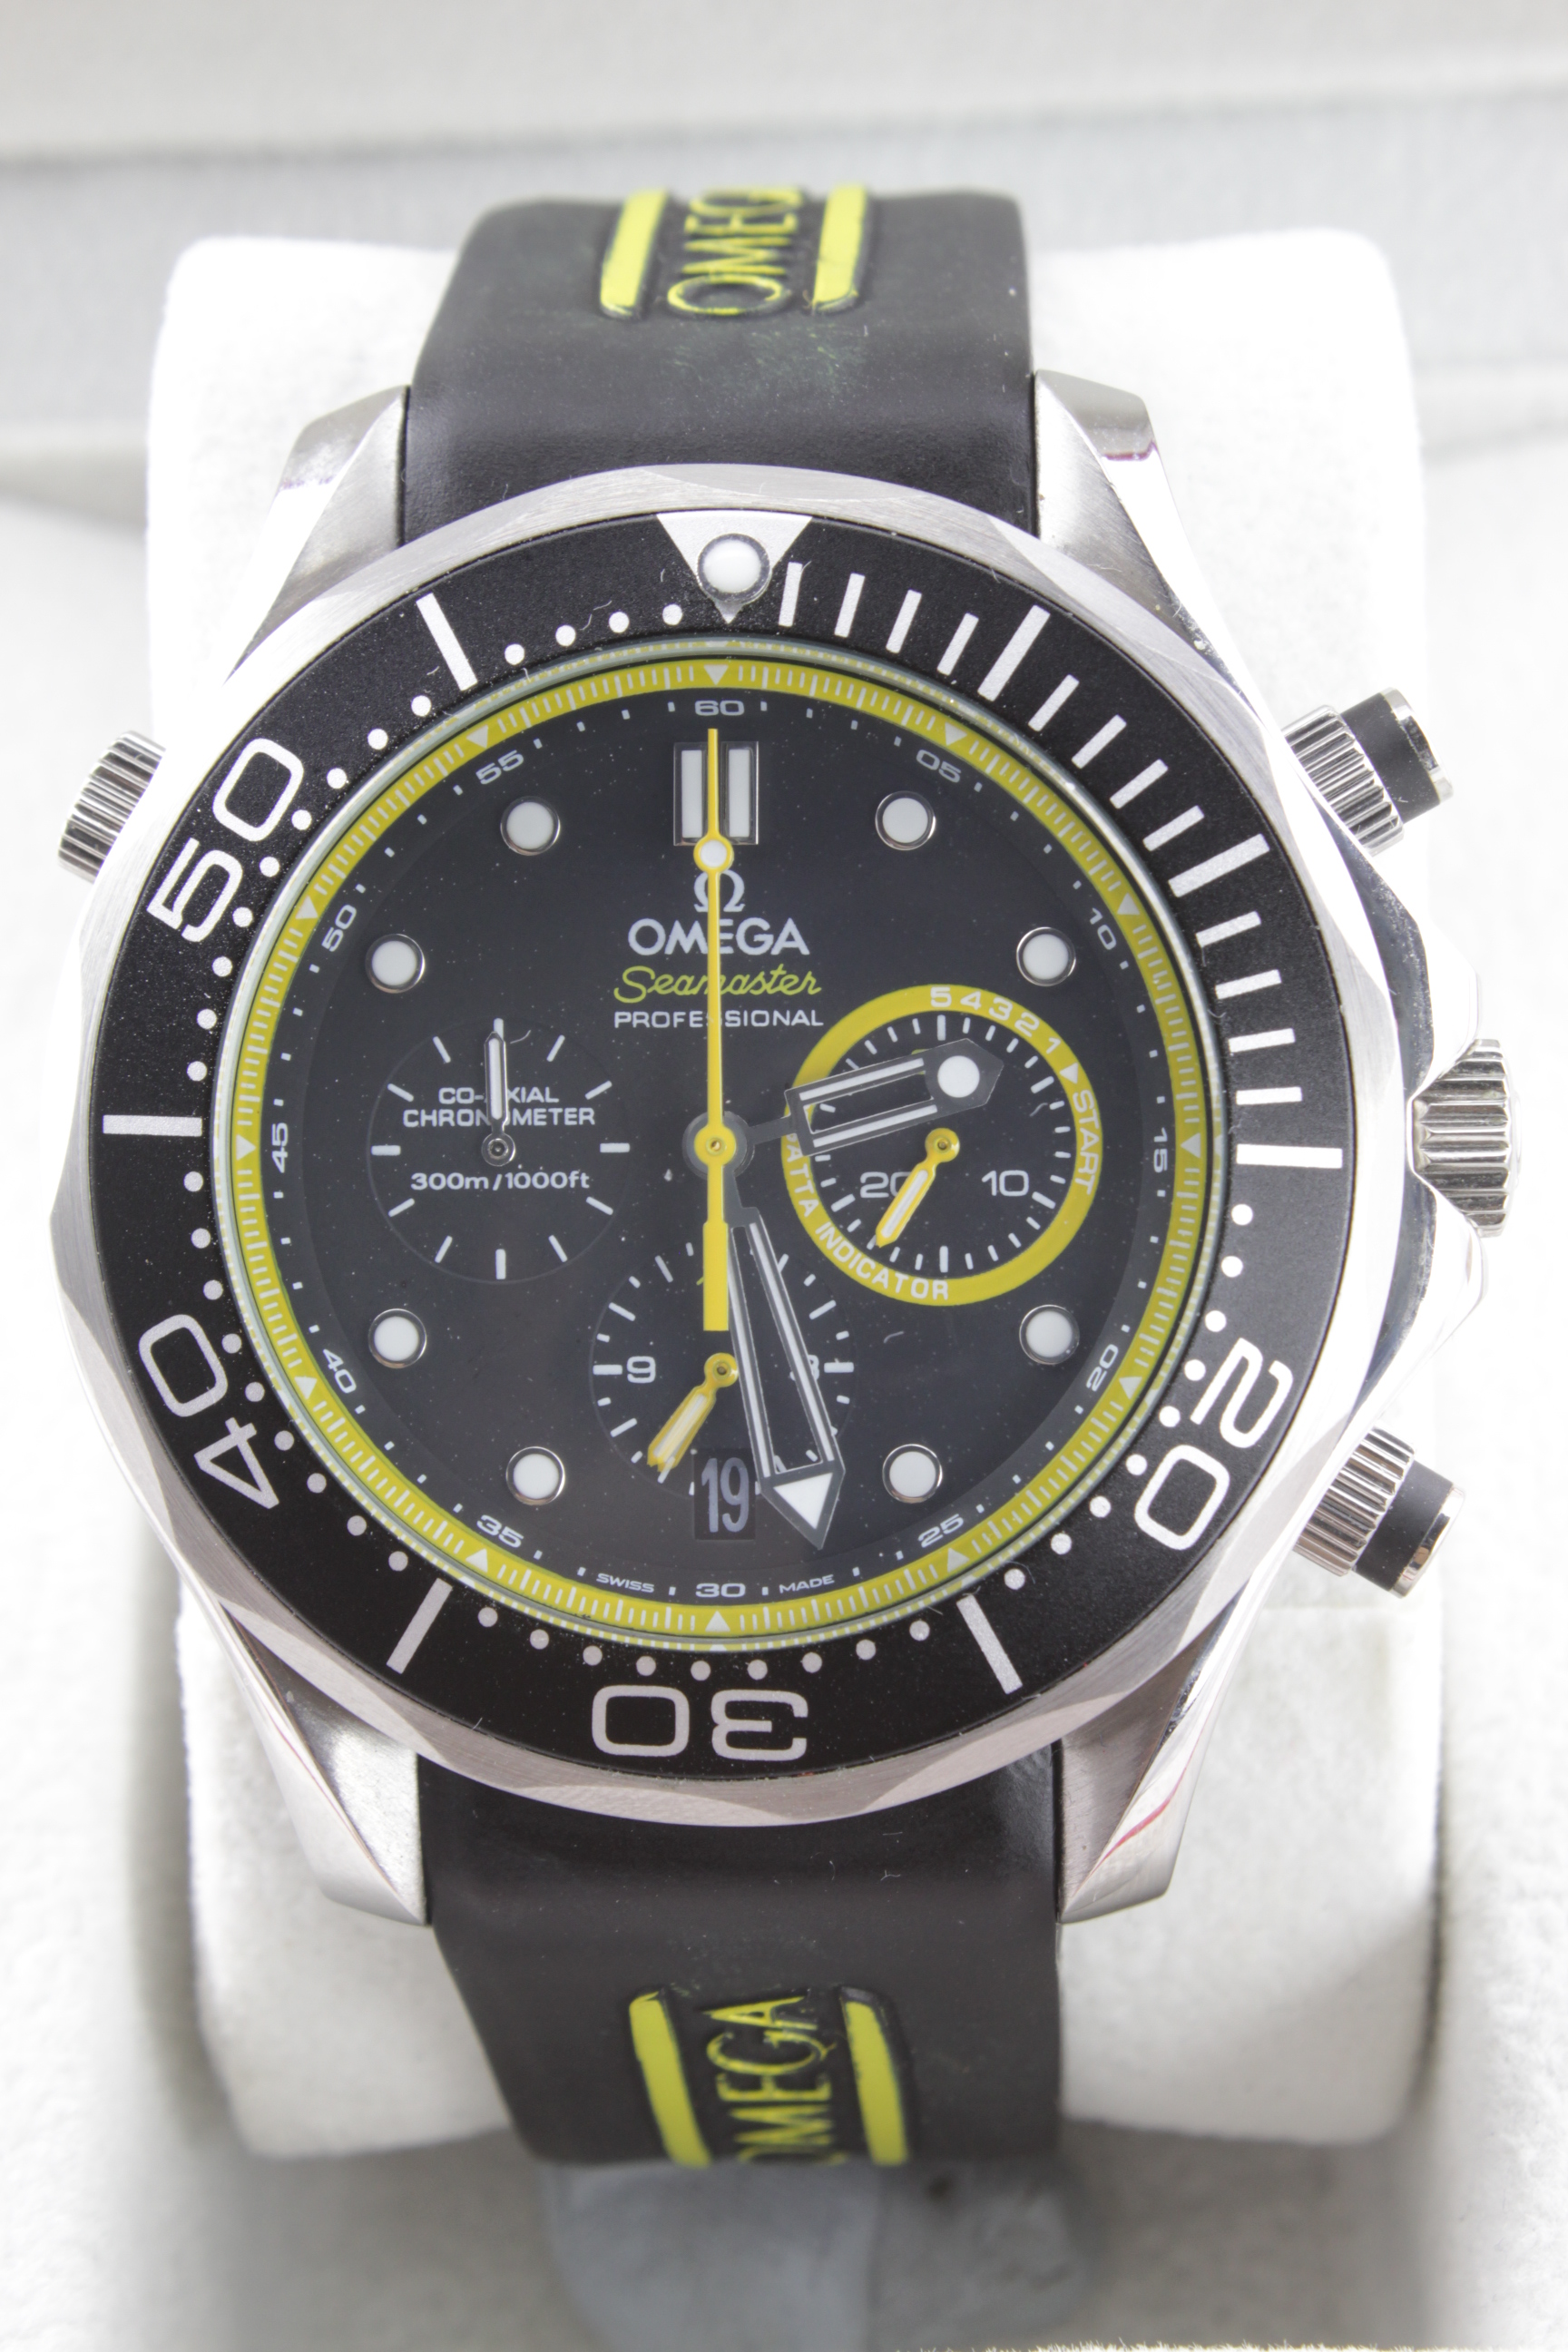 Gents Omega Seamaster Professional Chrono Limited Edition 34TH America's Cup wristwatch, as new with